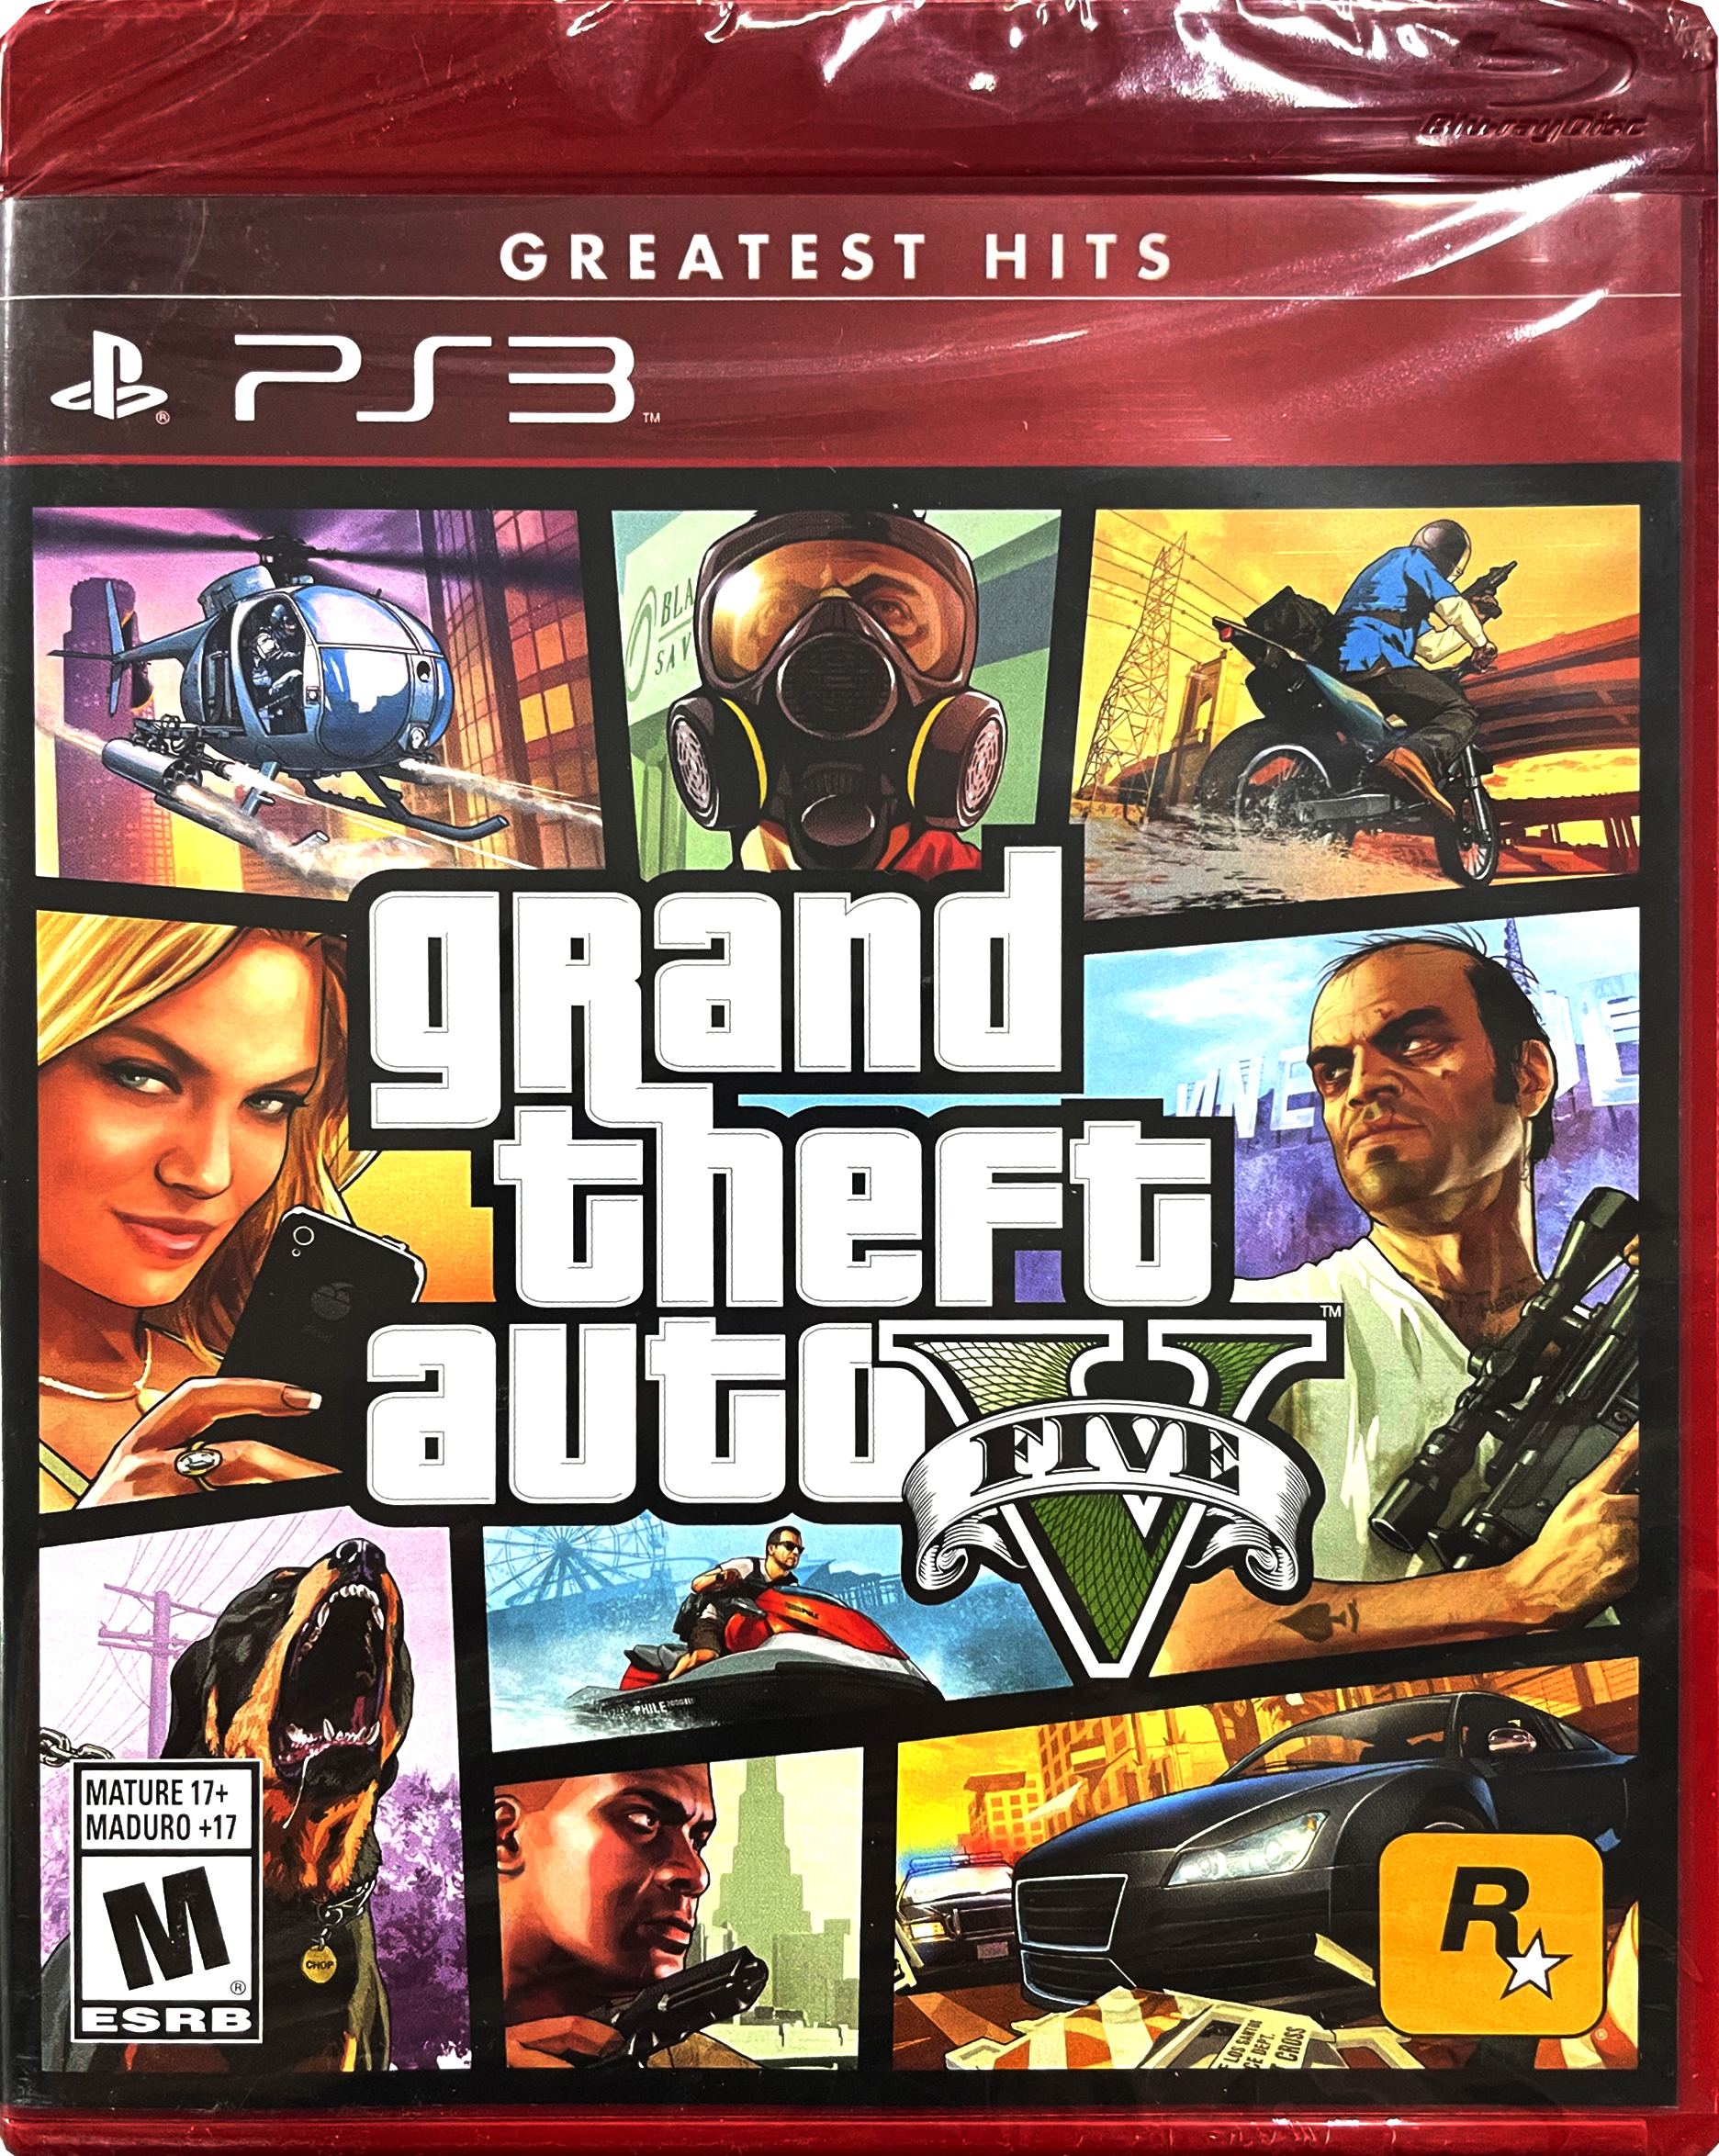 Grand Theft Auto V - Gta 5 (sony Playstation 3, 2013) Ps3 Game Reviews 2023